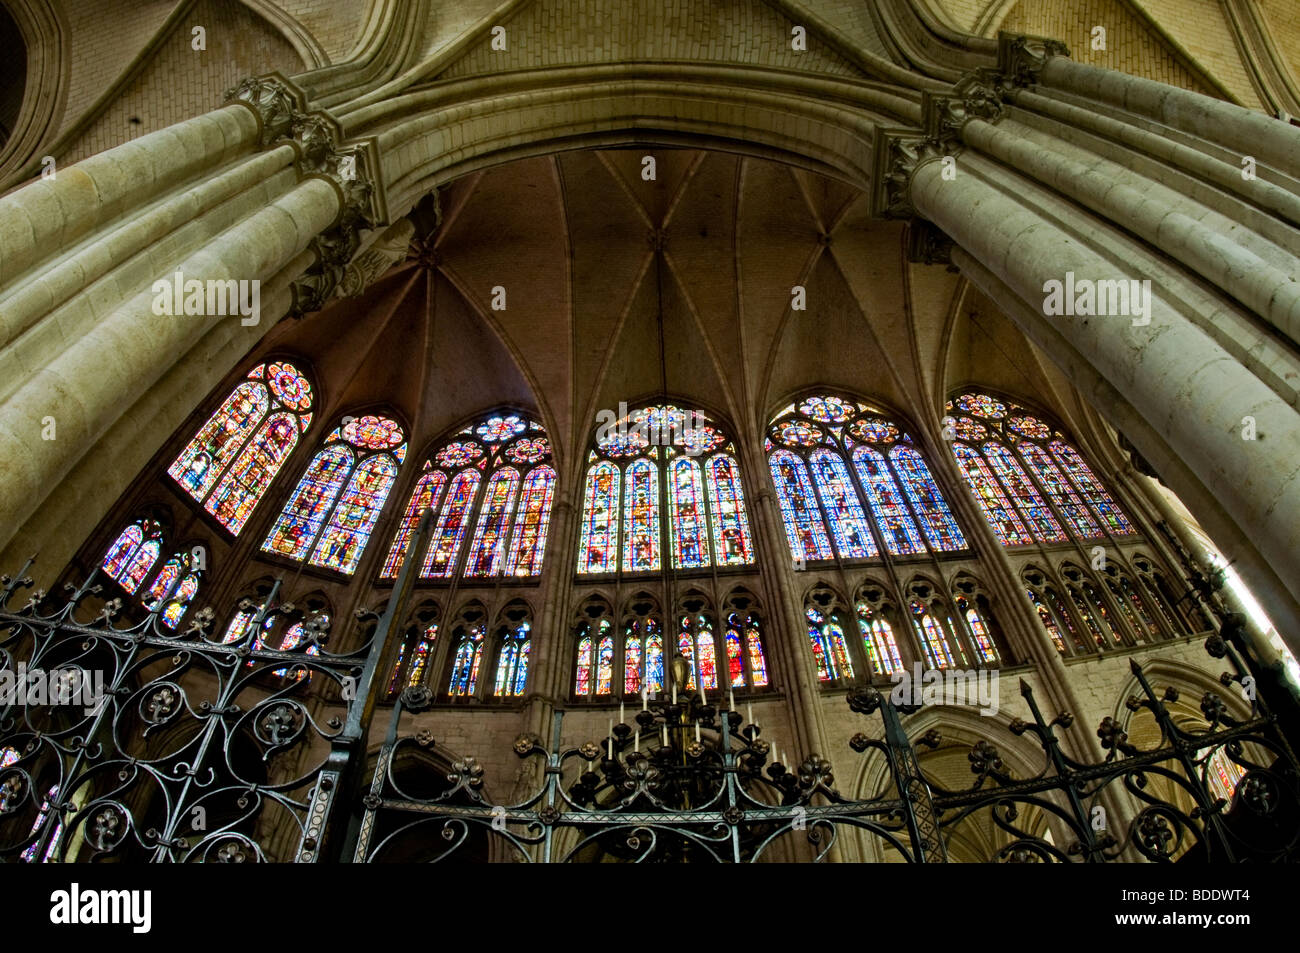 Cattedrale di Troyes, Francia. Foto Stock